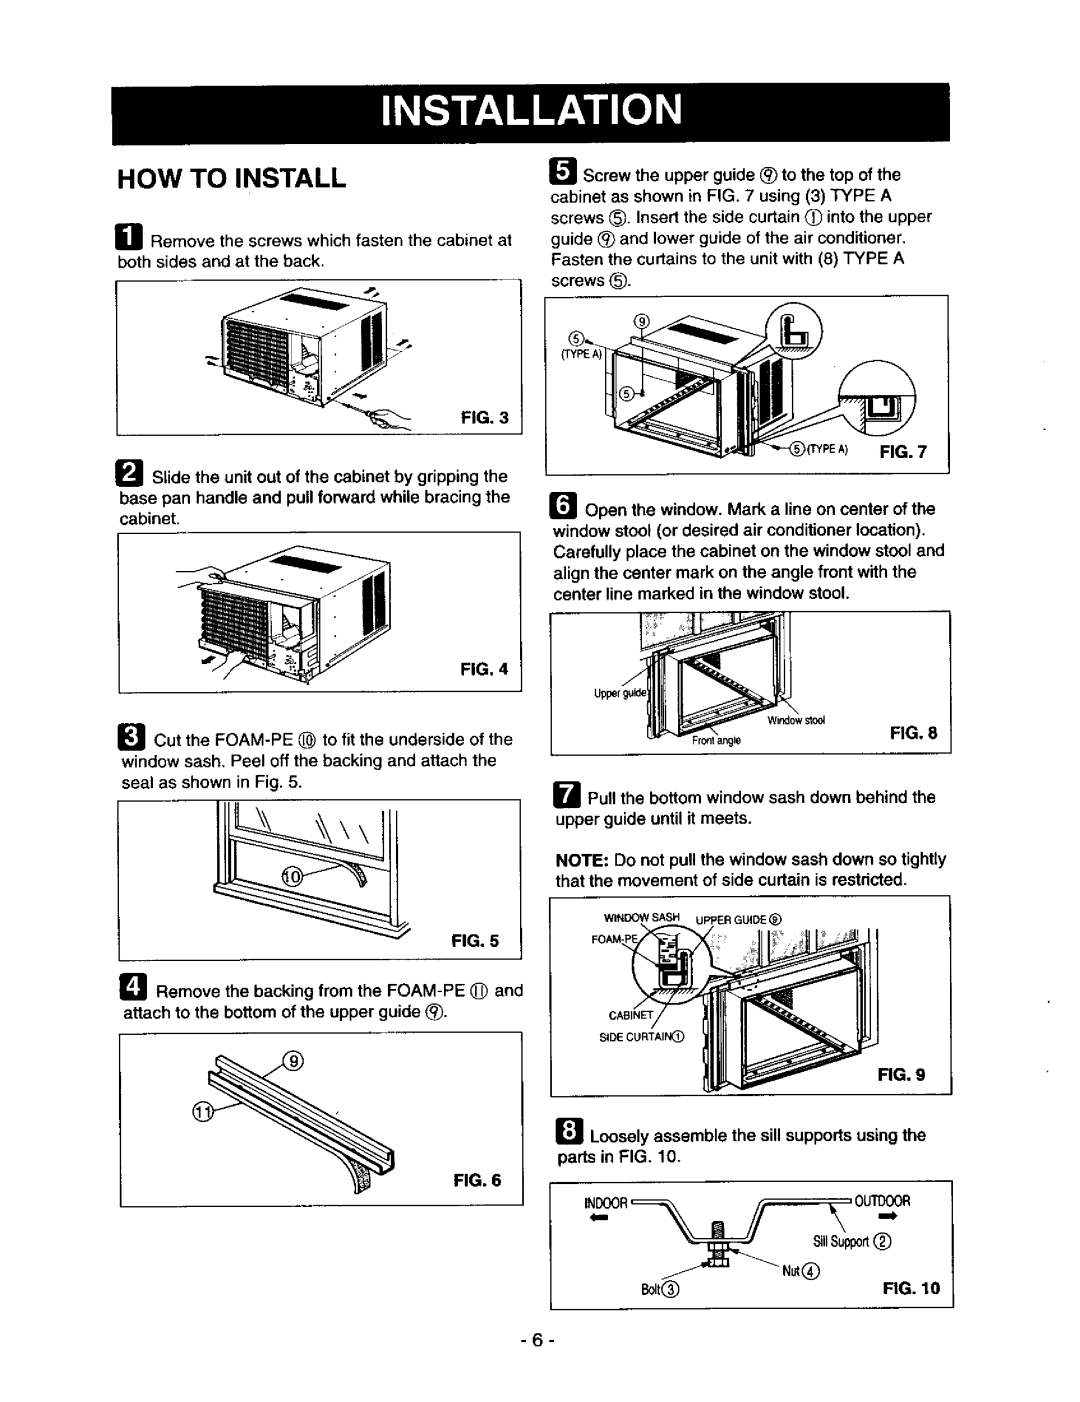 Kenmore 78122 owner manual How To Install 